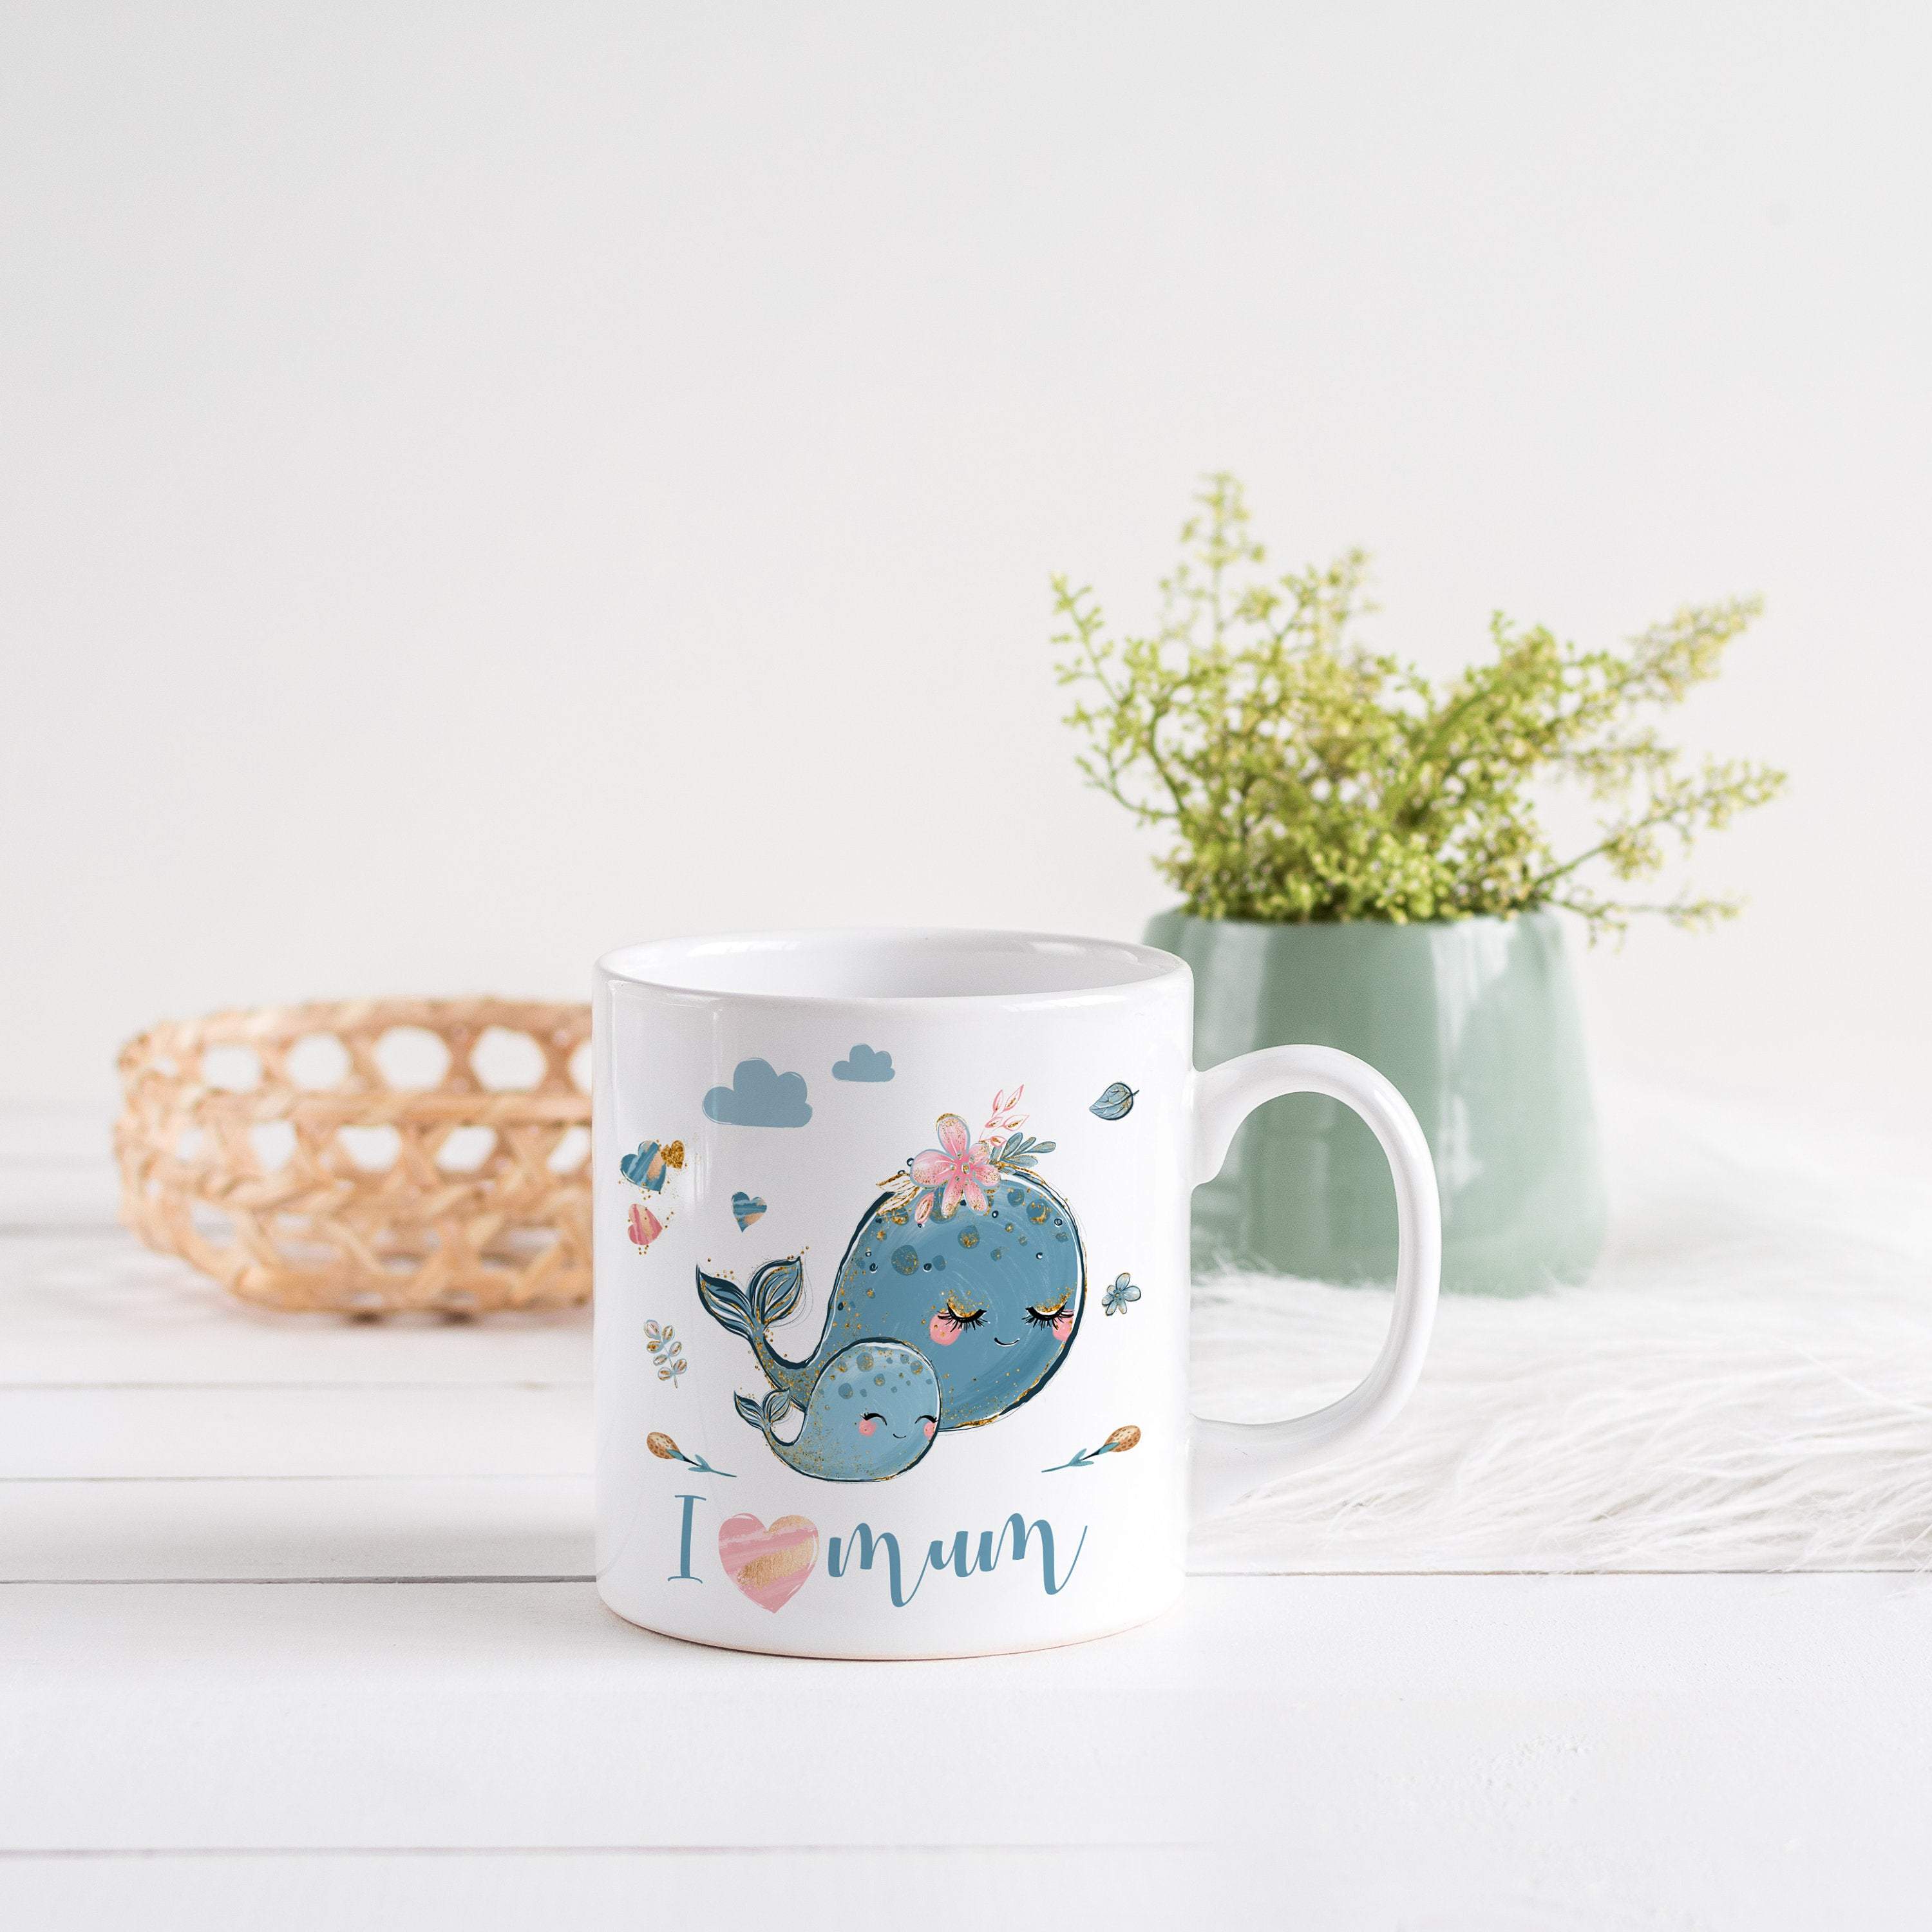 I love you mum mug, Mother's Day Gift, Mother and baby animals, First Mother's Day gift for mom